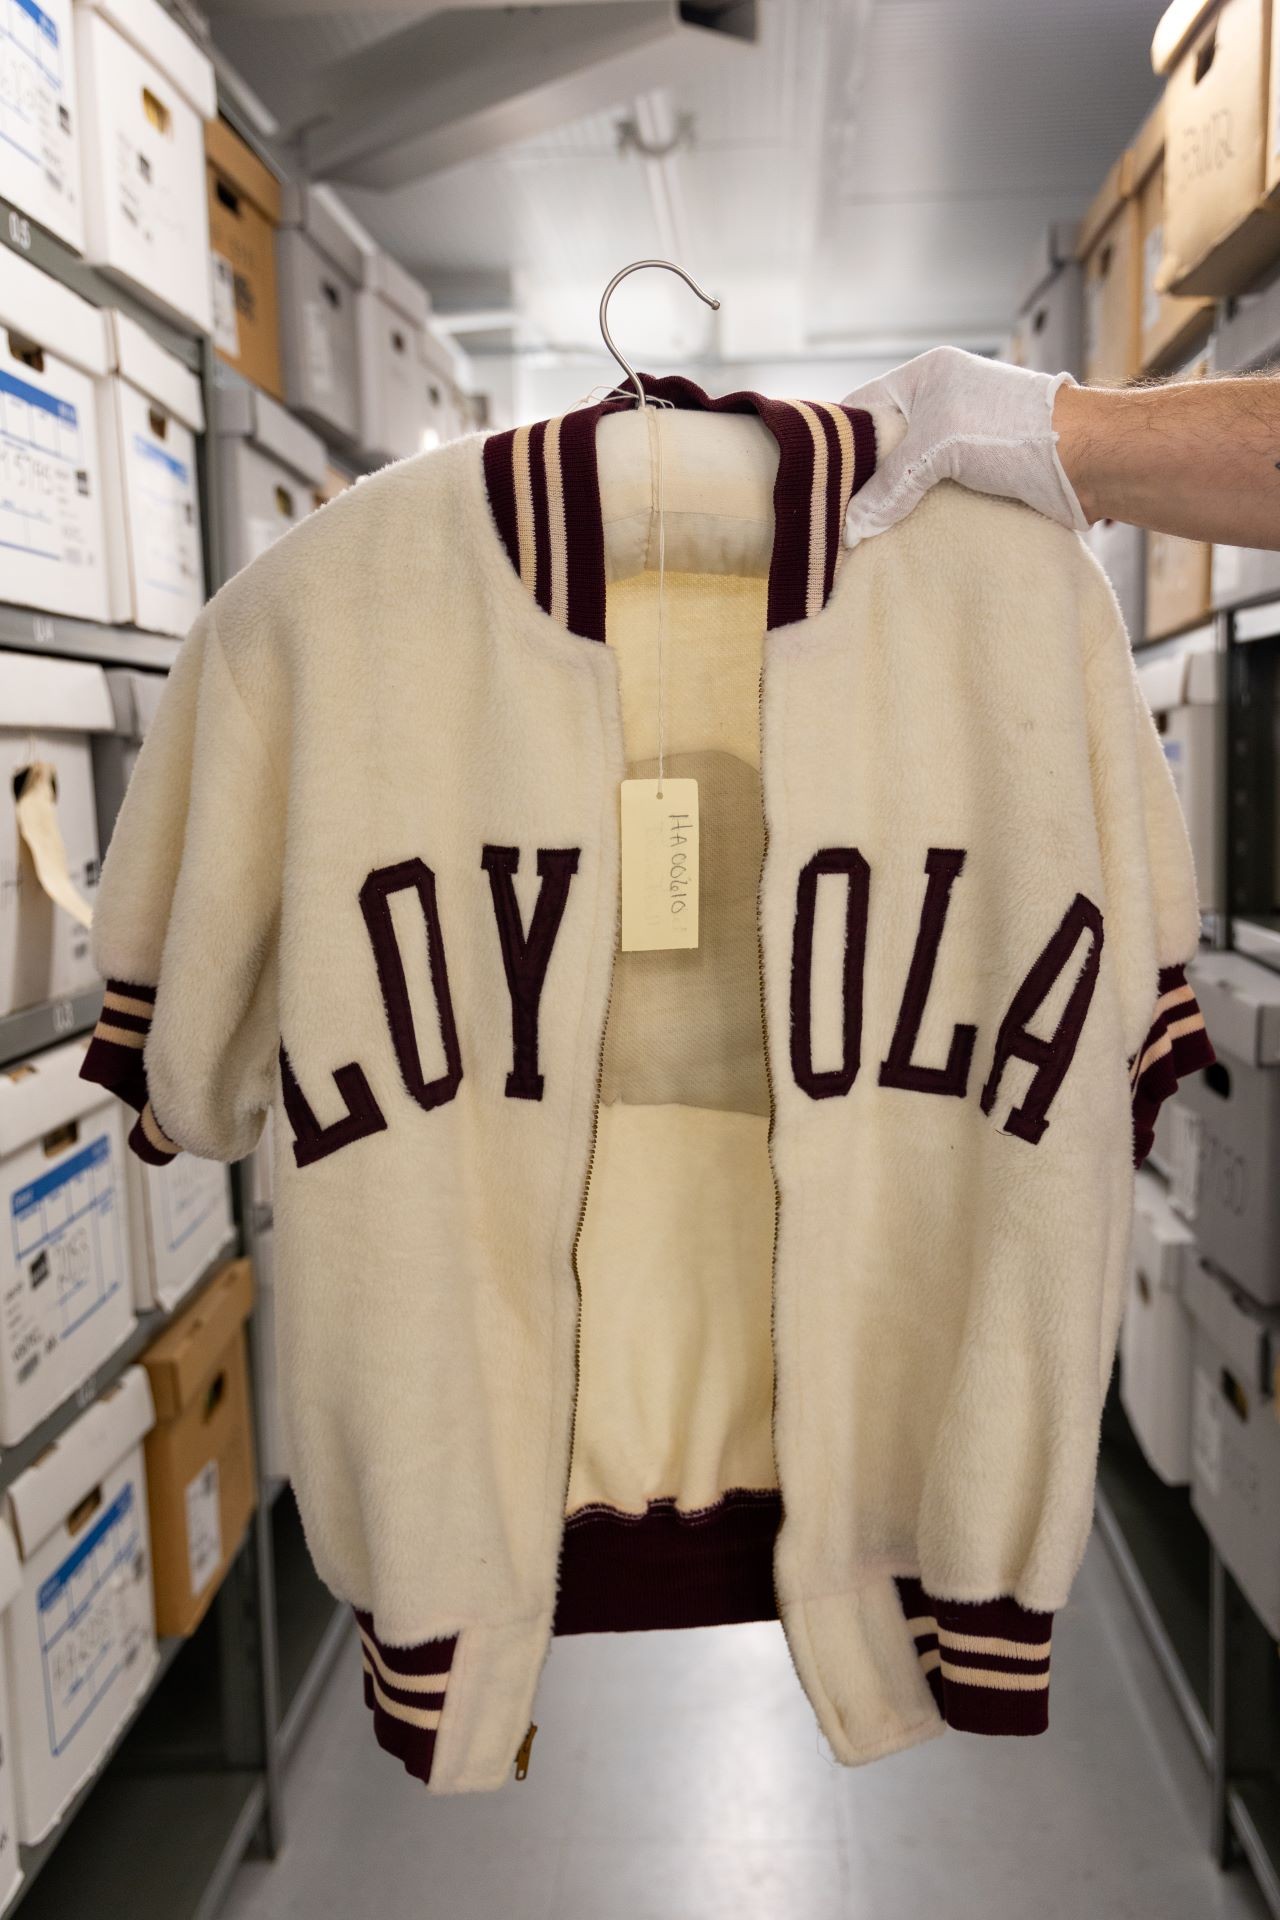 A hand holds a classic varsity jacket with "LOYOLA" text, symbolizing the legacy and sports history of Loyola Colllege.